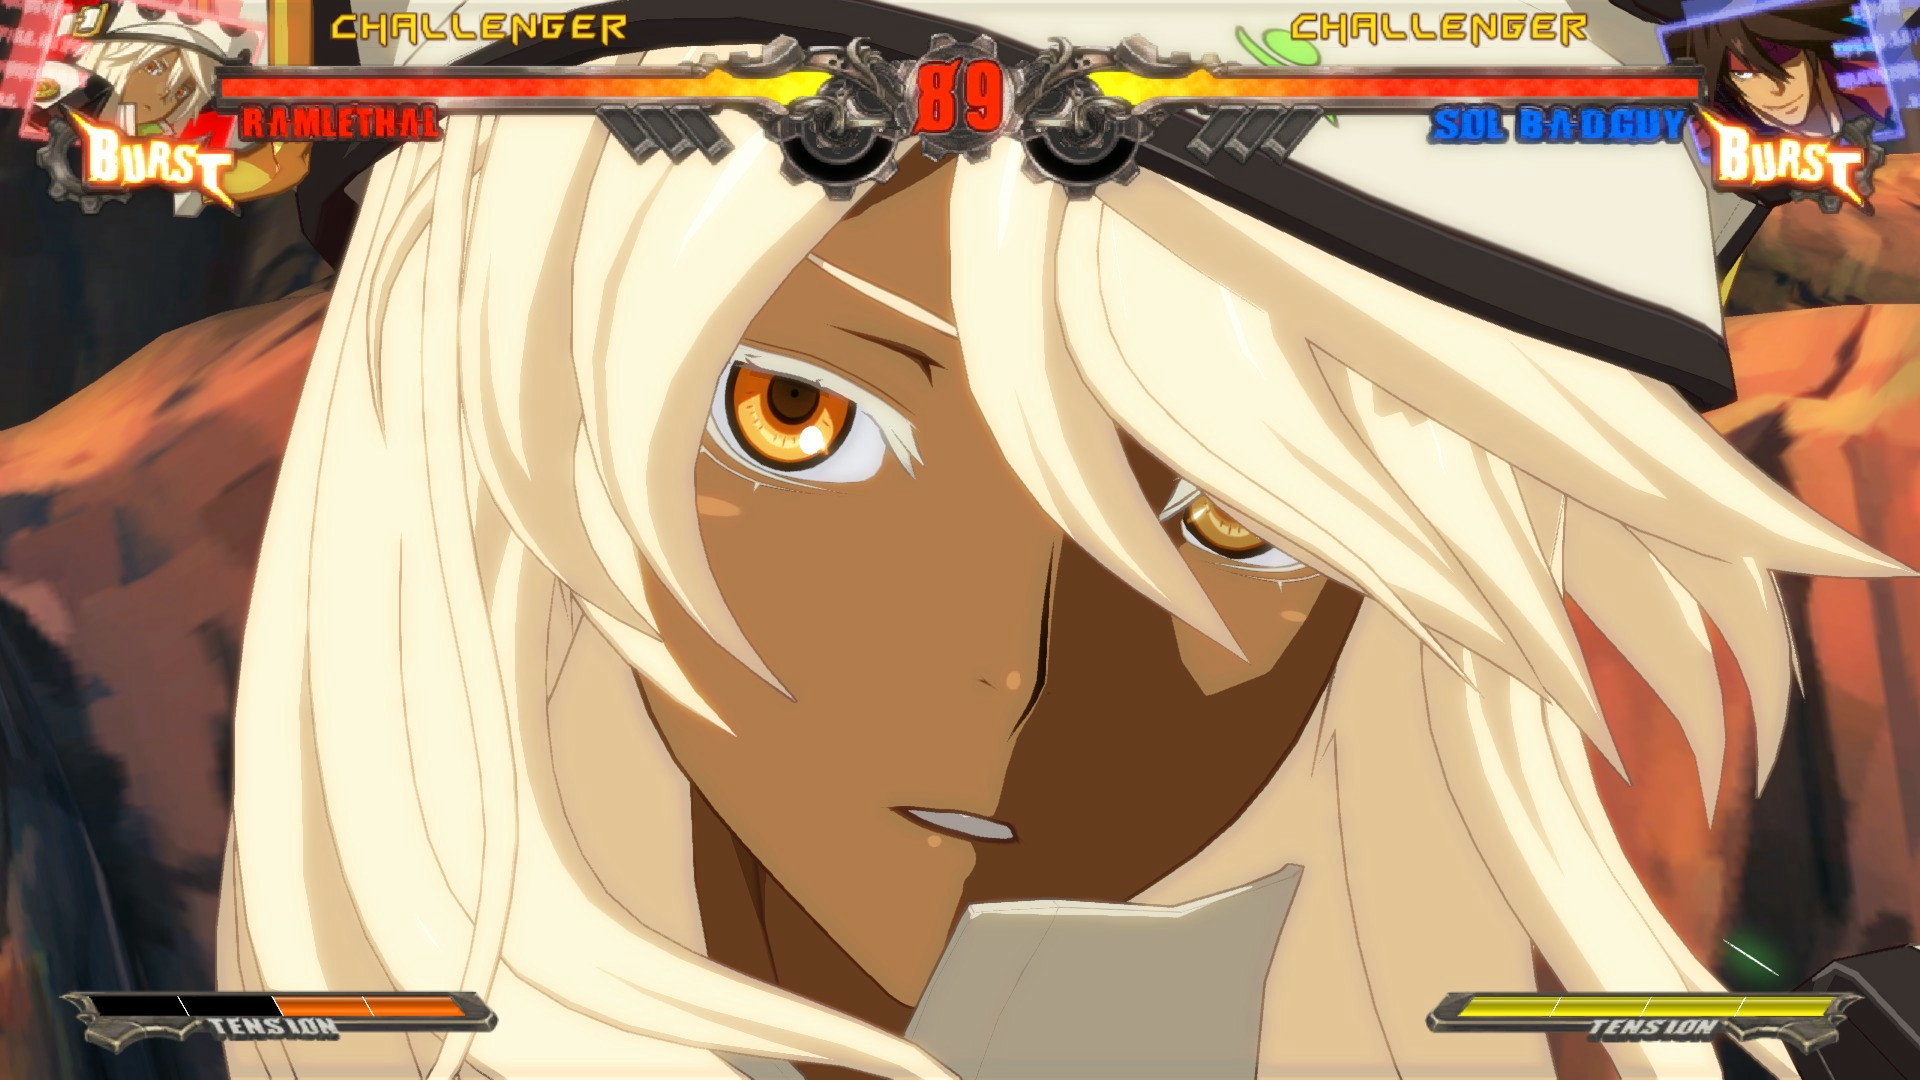 Guilty Gear Xrd Sign Ps3とps4で登場 新モード 新キャラクター追加など 家庭用ならではの要素を紹介 Game Watch